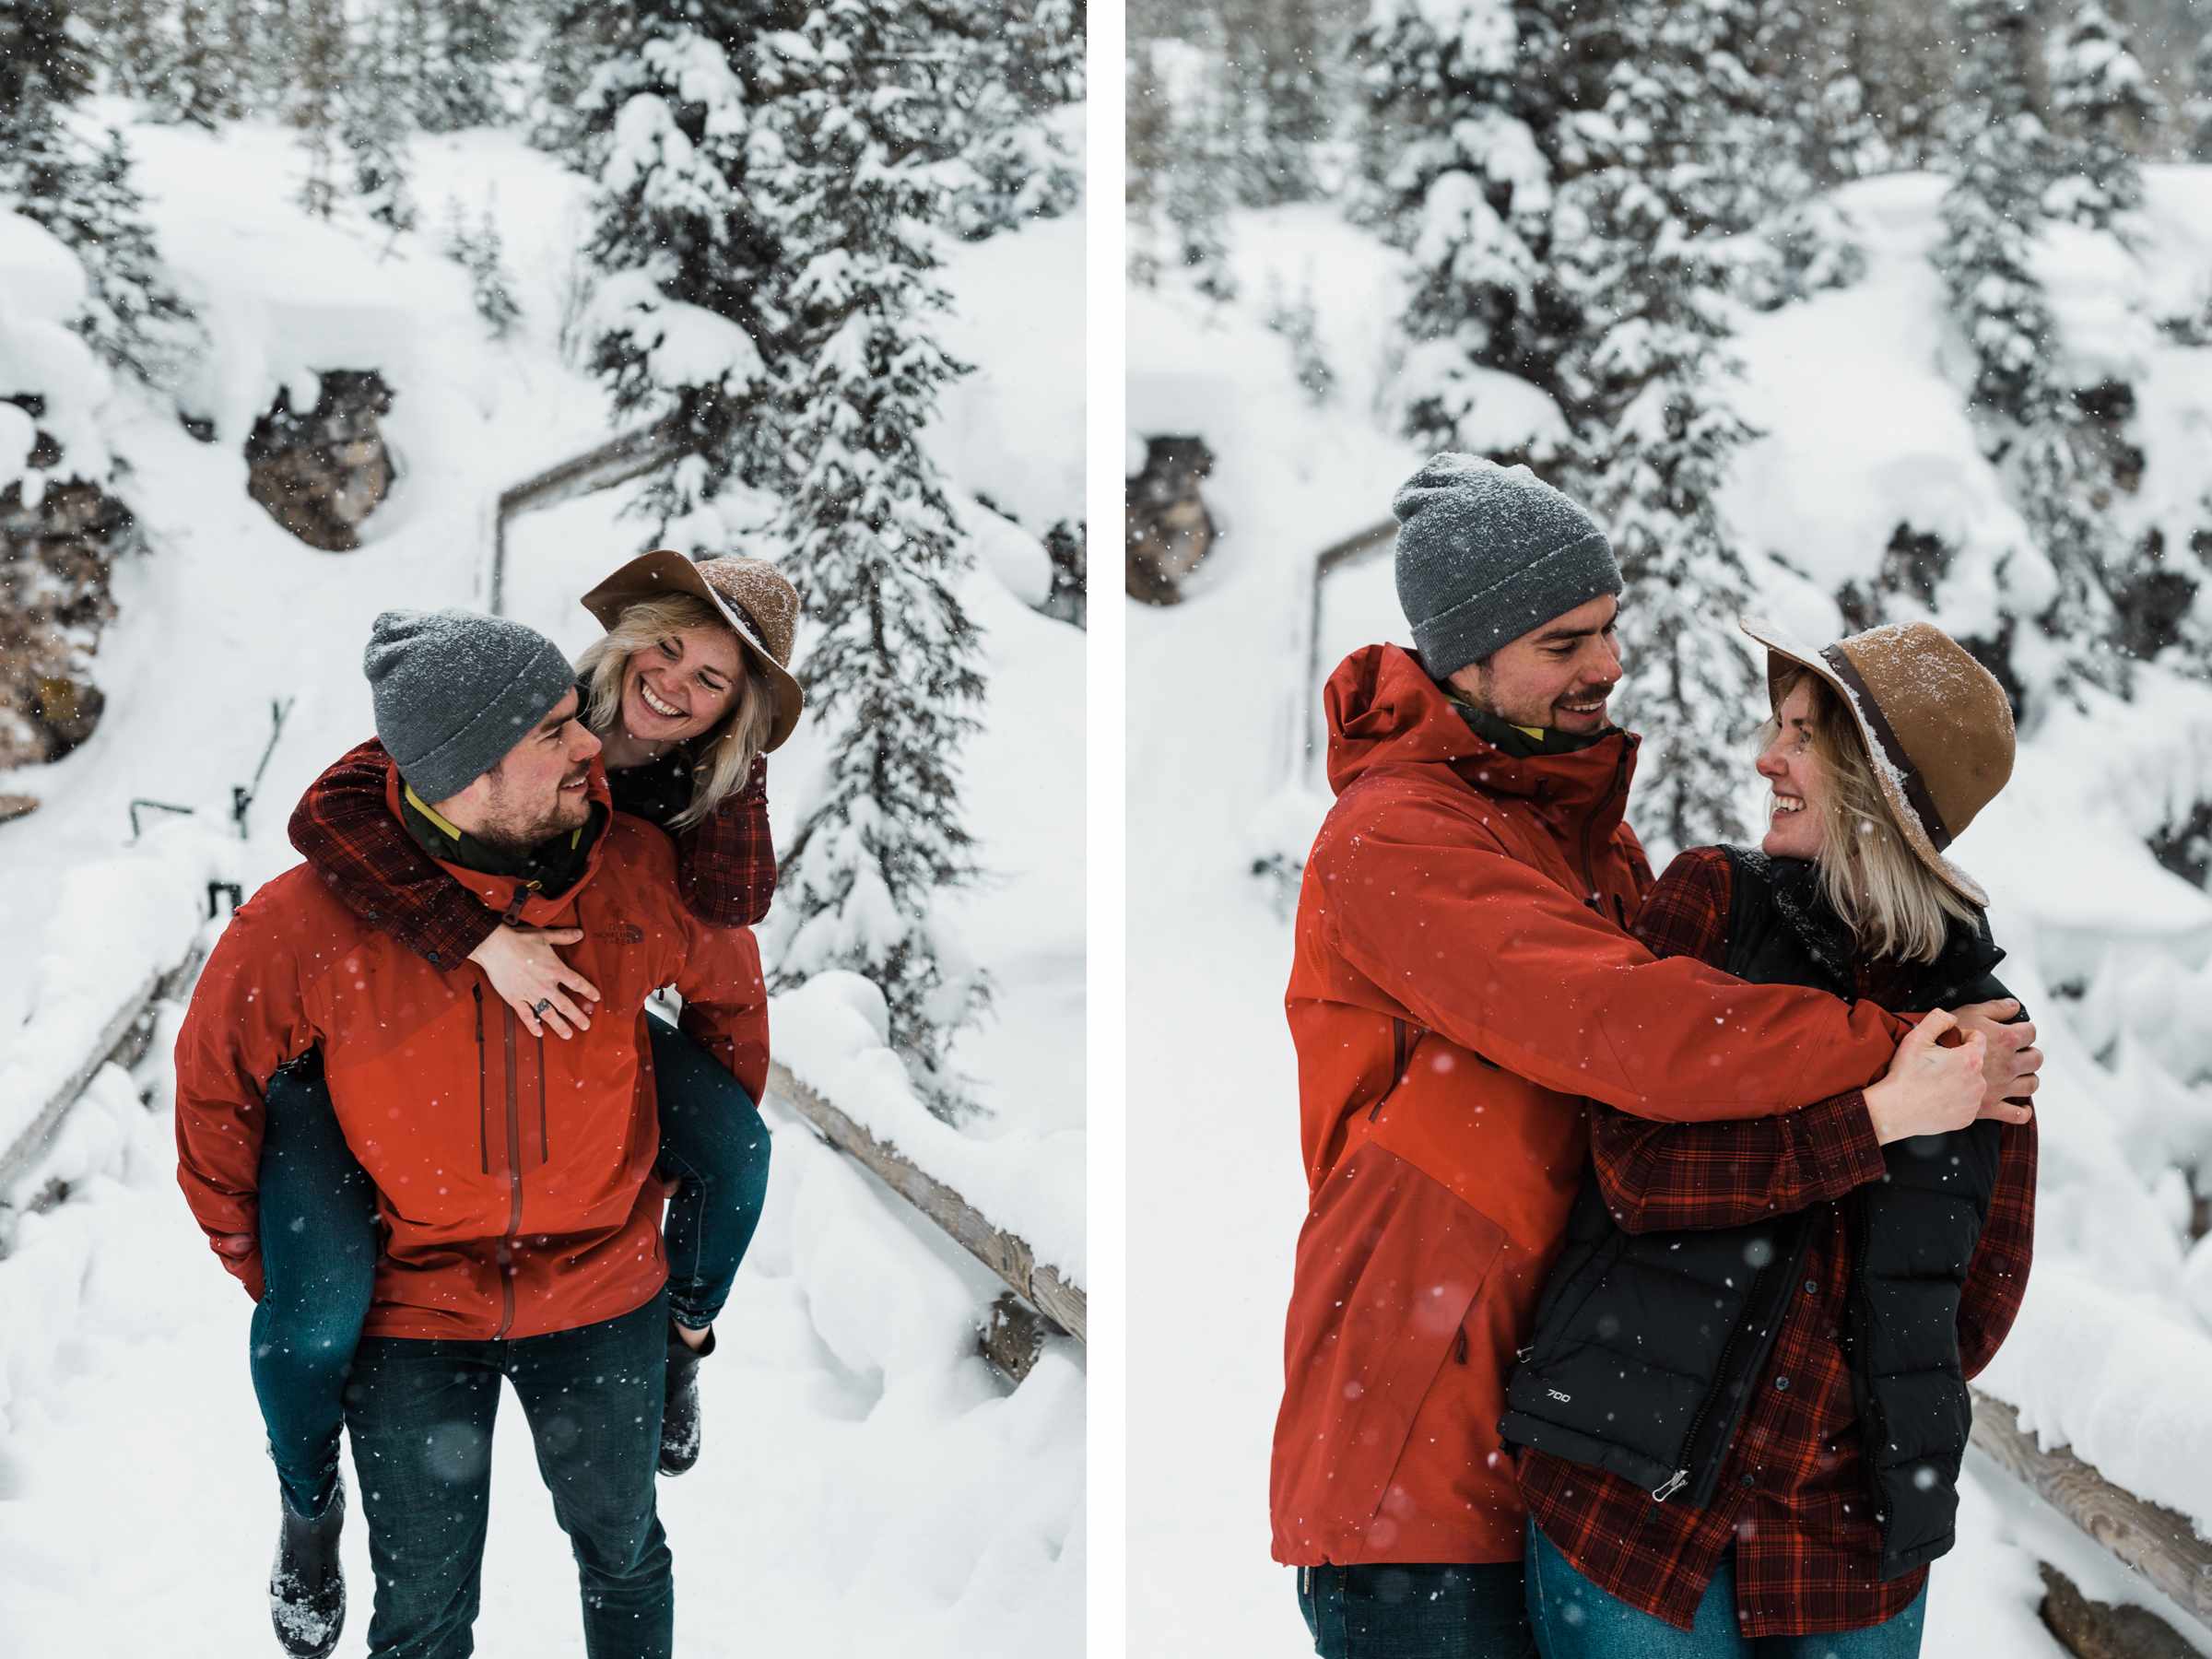 Kootenay National Park Engagement Photography Adventure Session in British Columbia and Alberta - Image 5